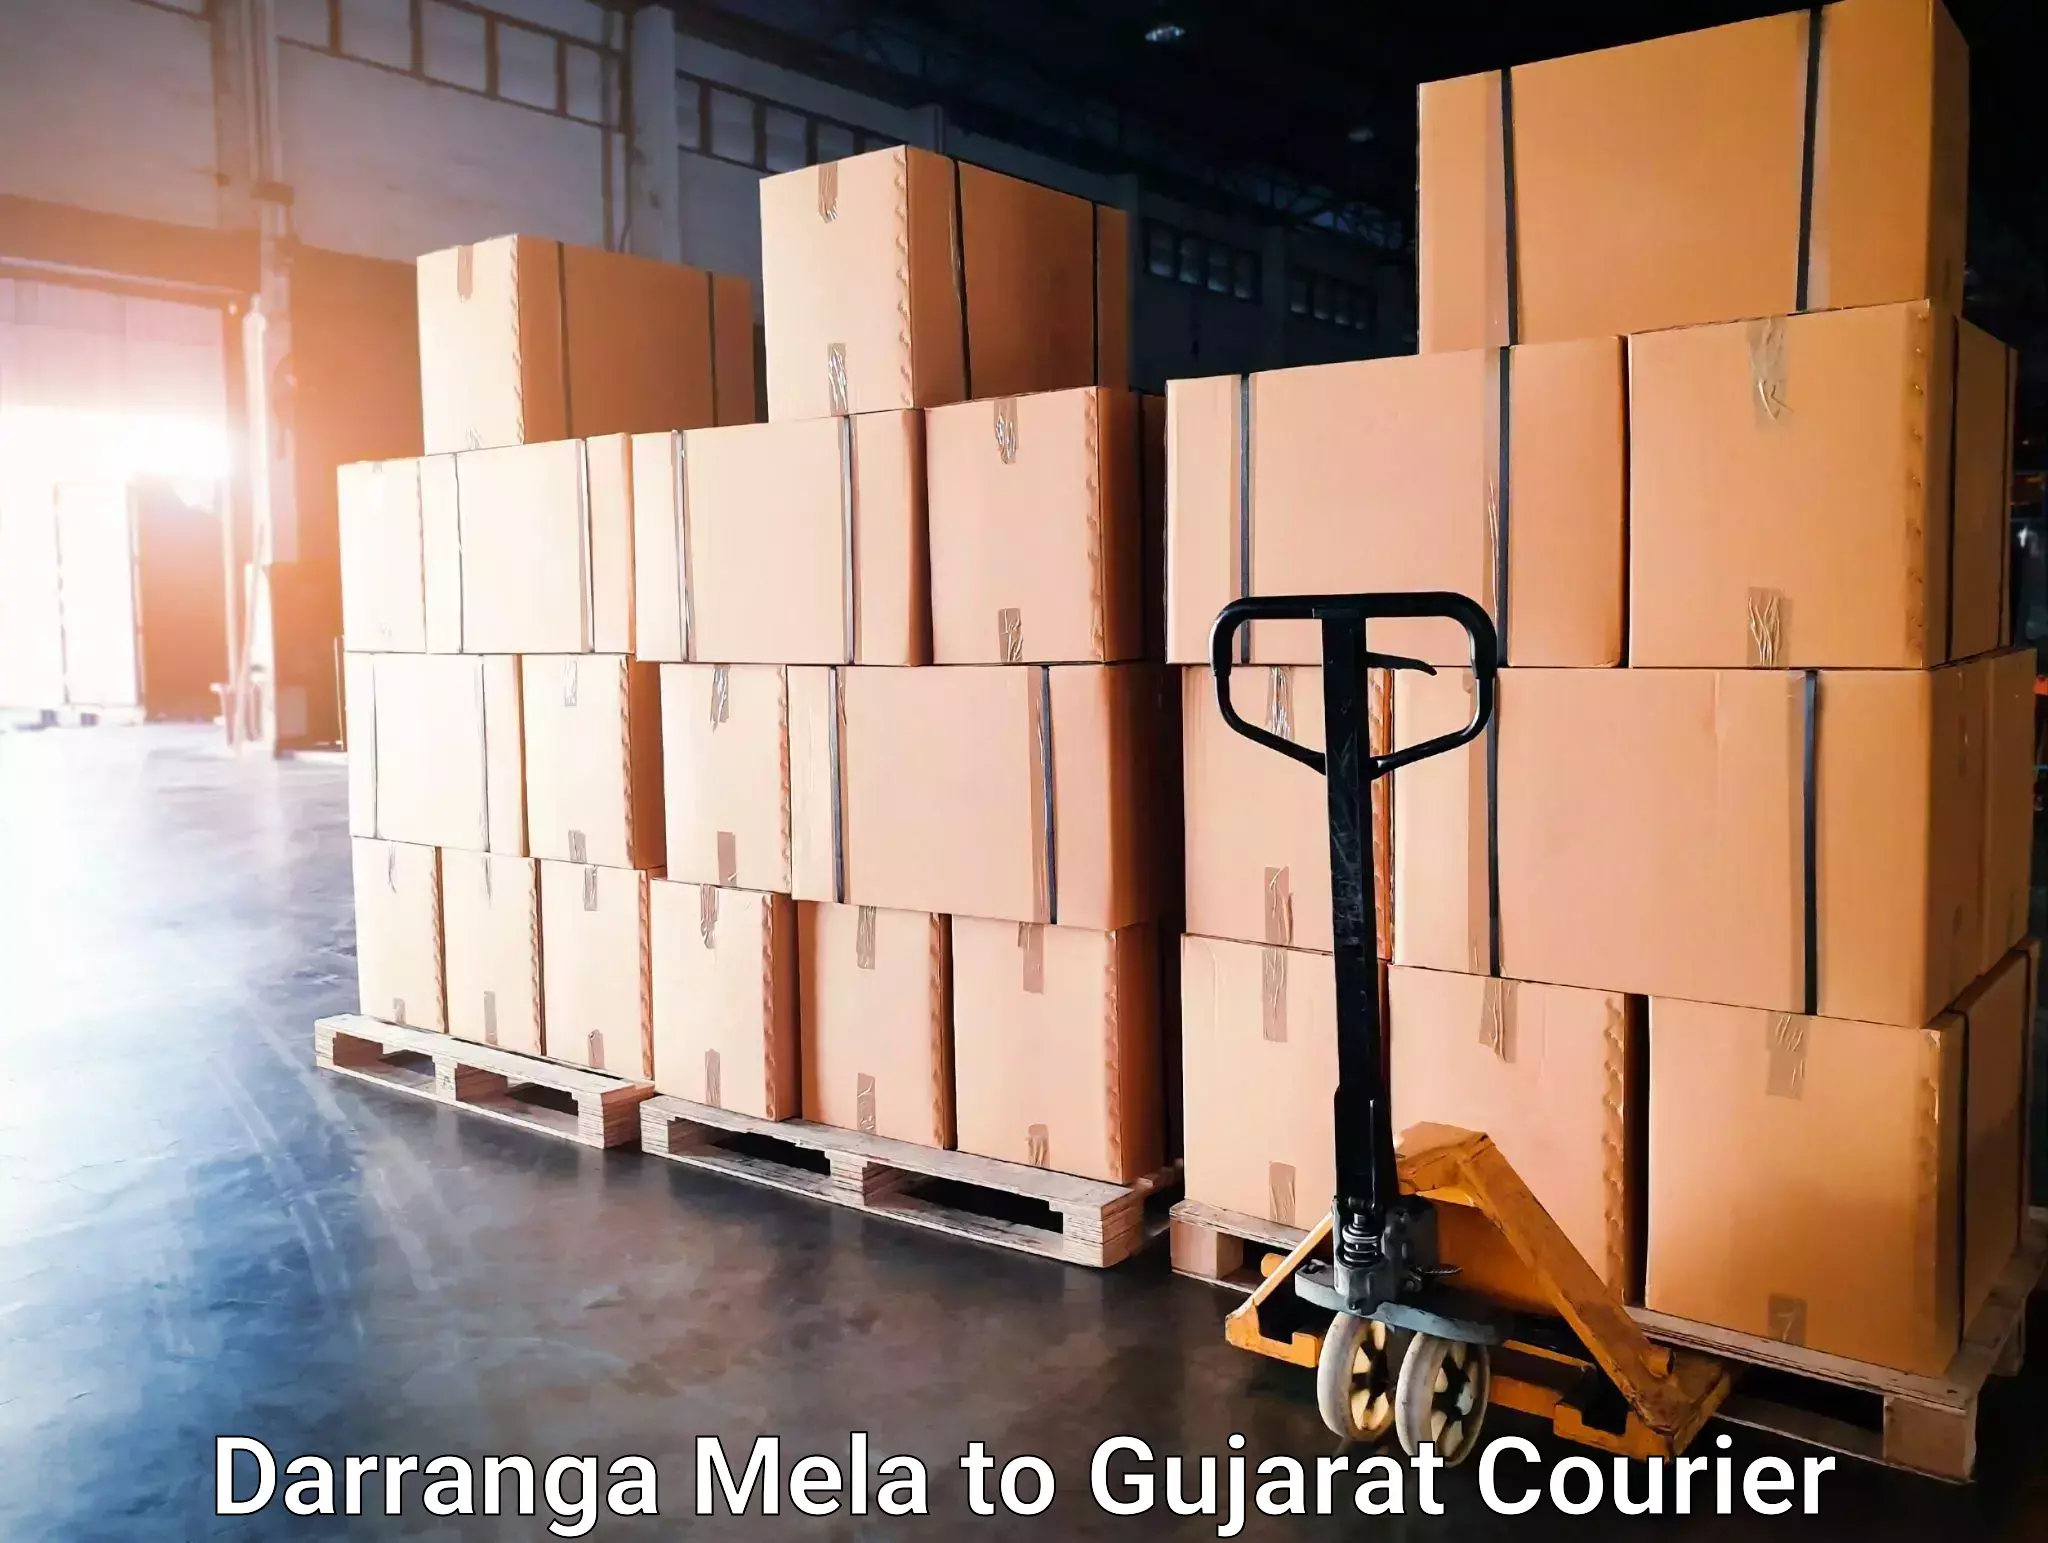 Multi-national courier services Darranga Mela to Ahwa